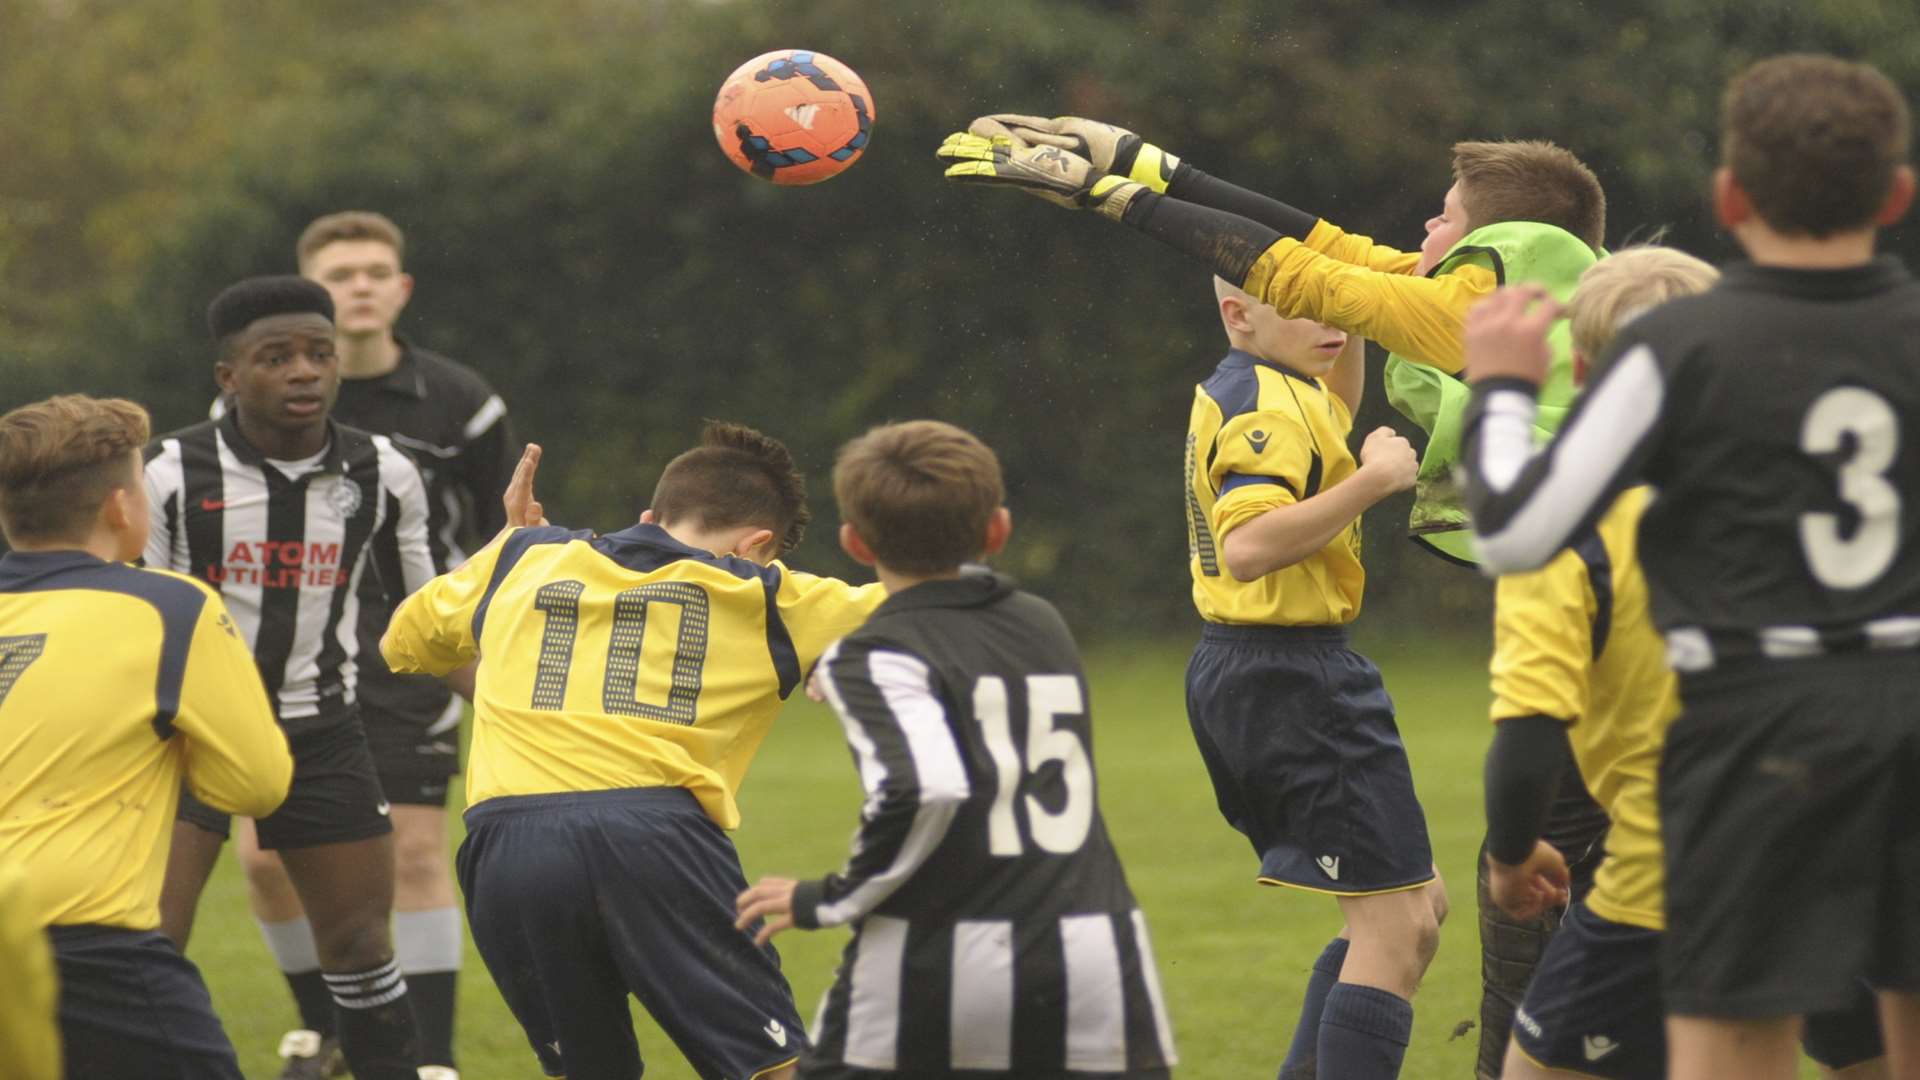 Strood 87, in yellow, up against Real 60 in Under-14 Division 2 Picture: Steve Crispe